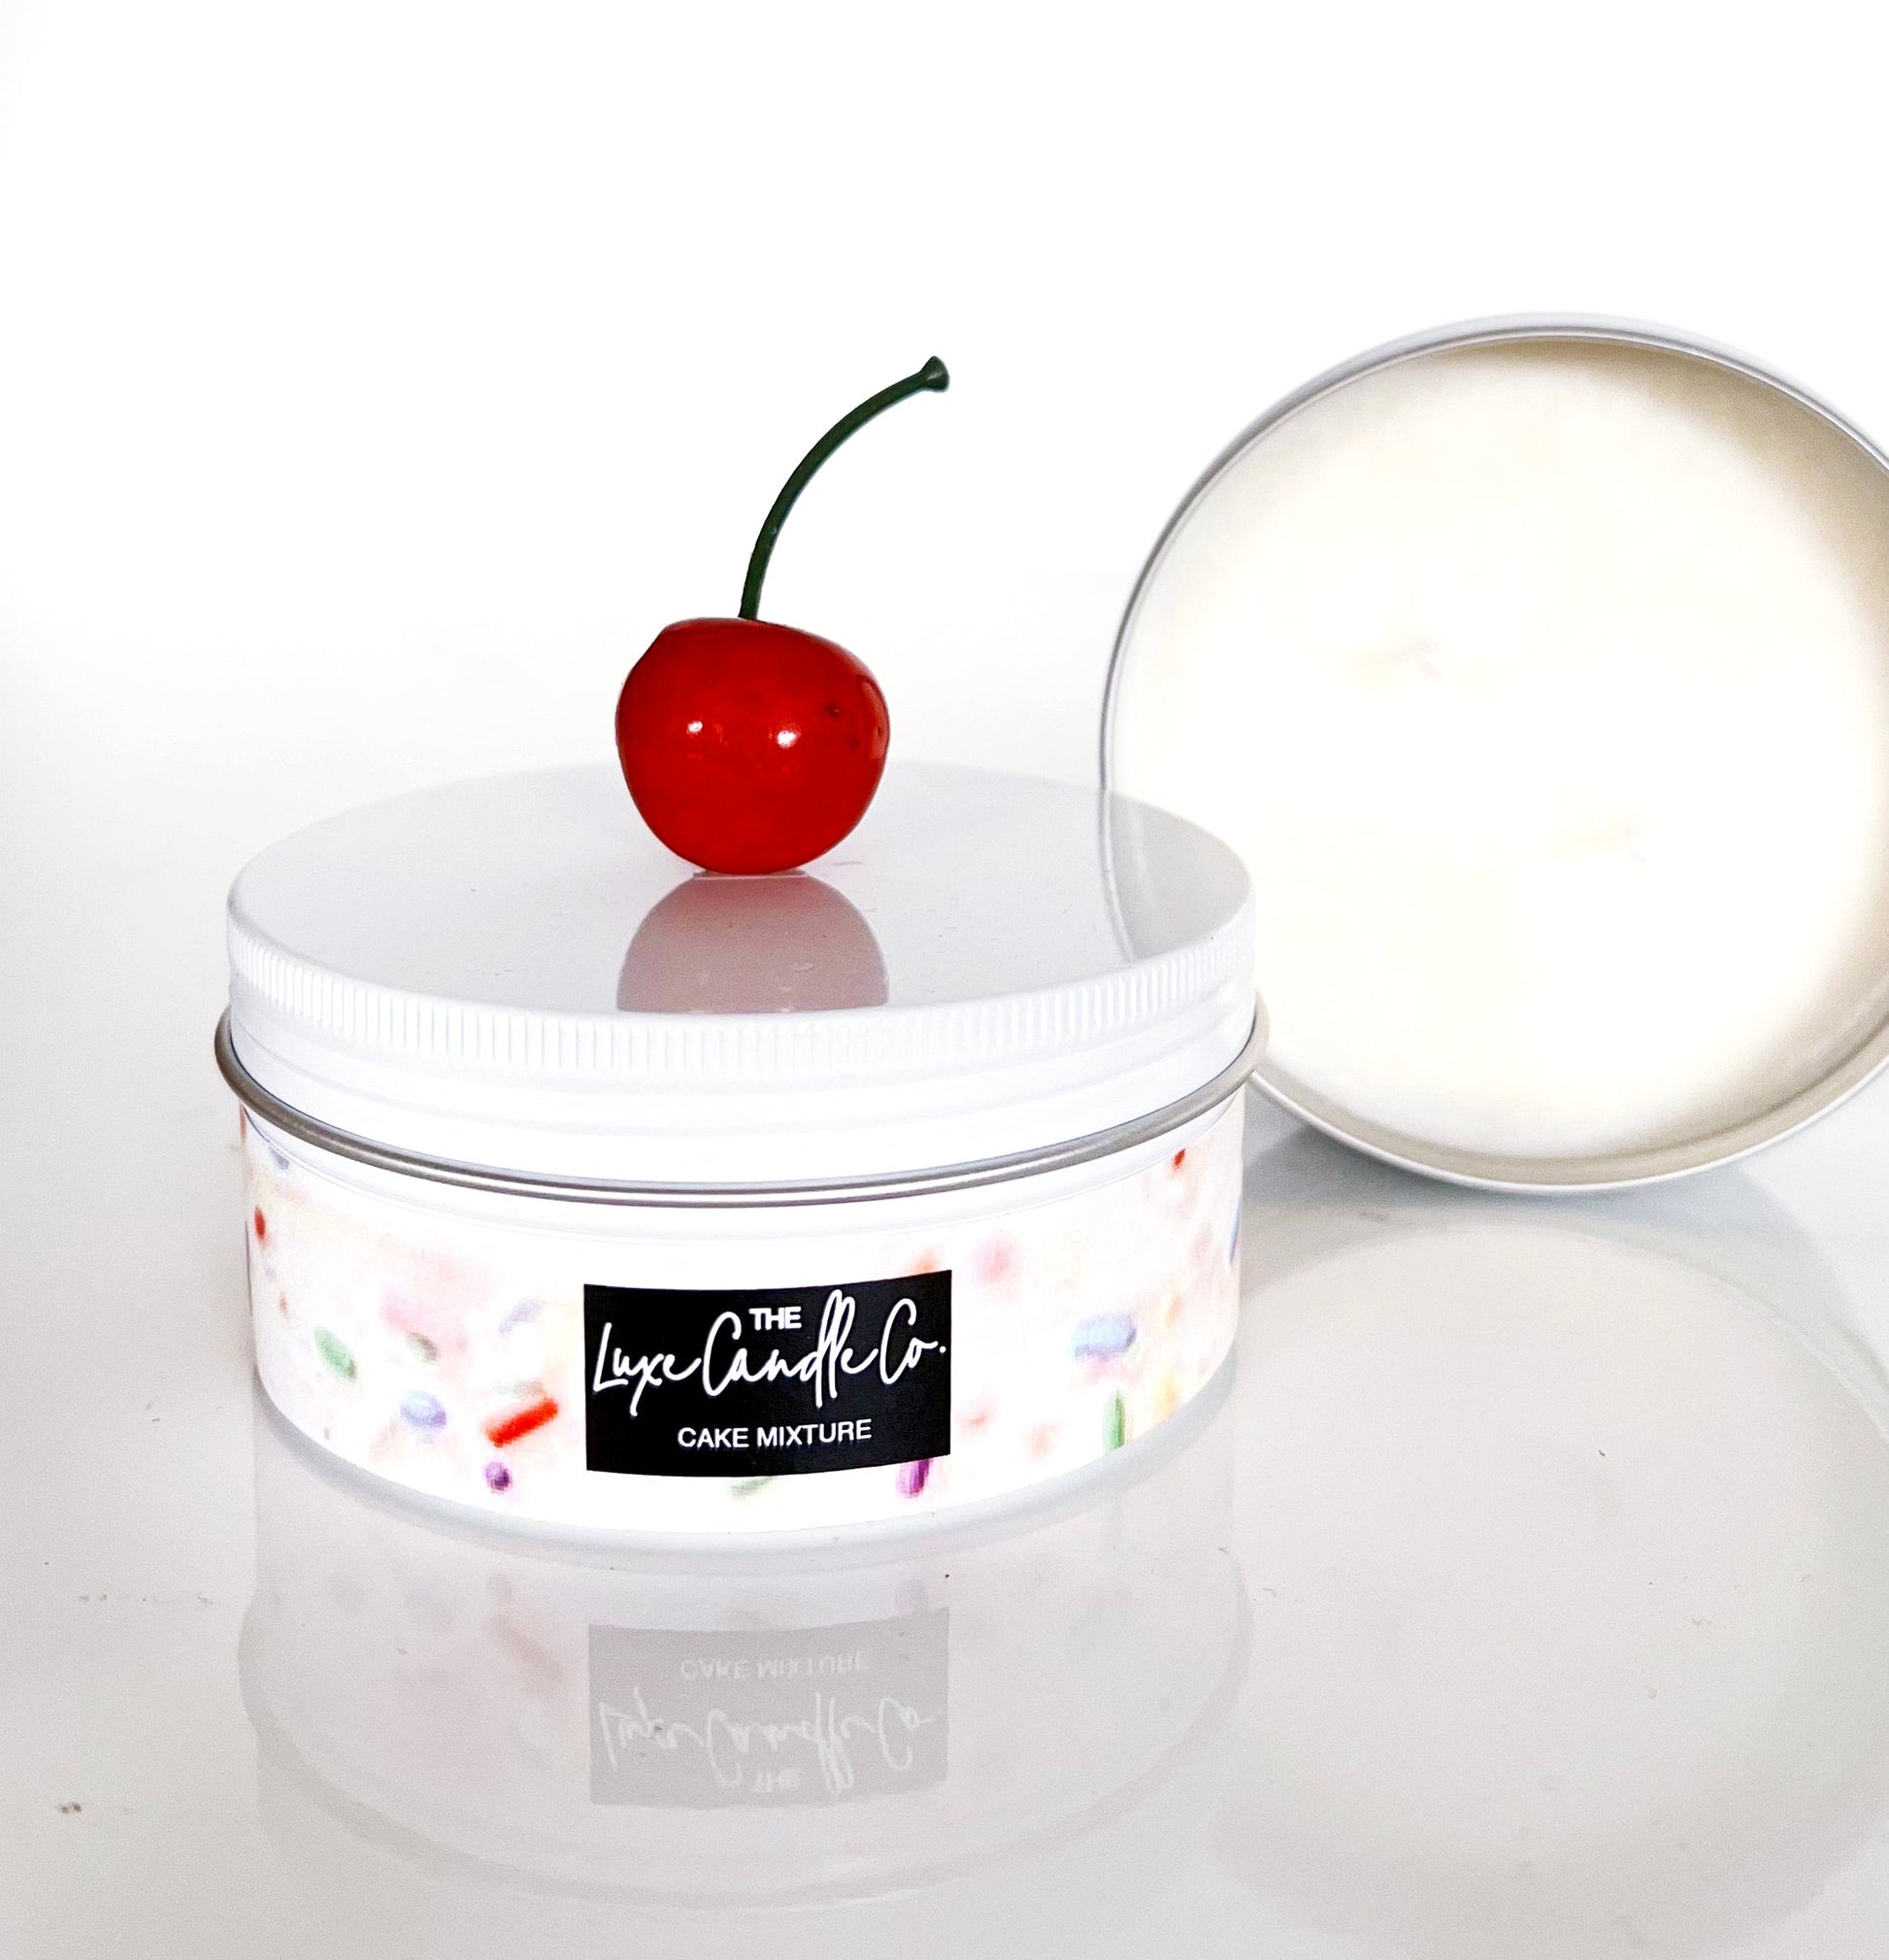 Cherry on the top 21st birthday gift candle in tin in cake mixture fragrance scented